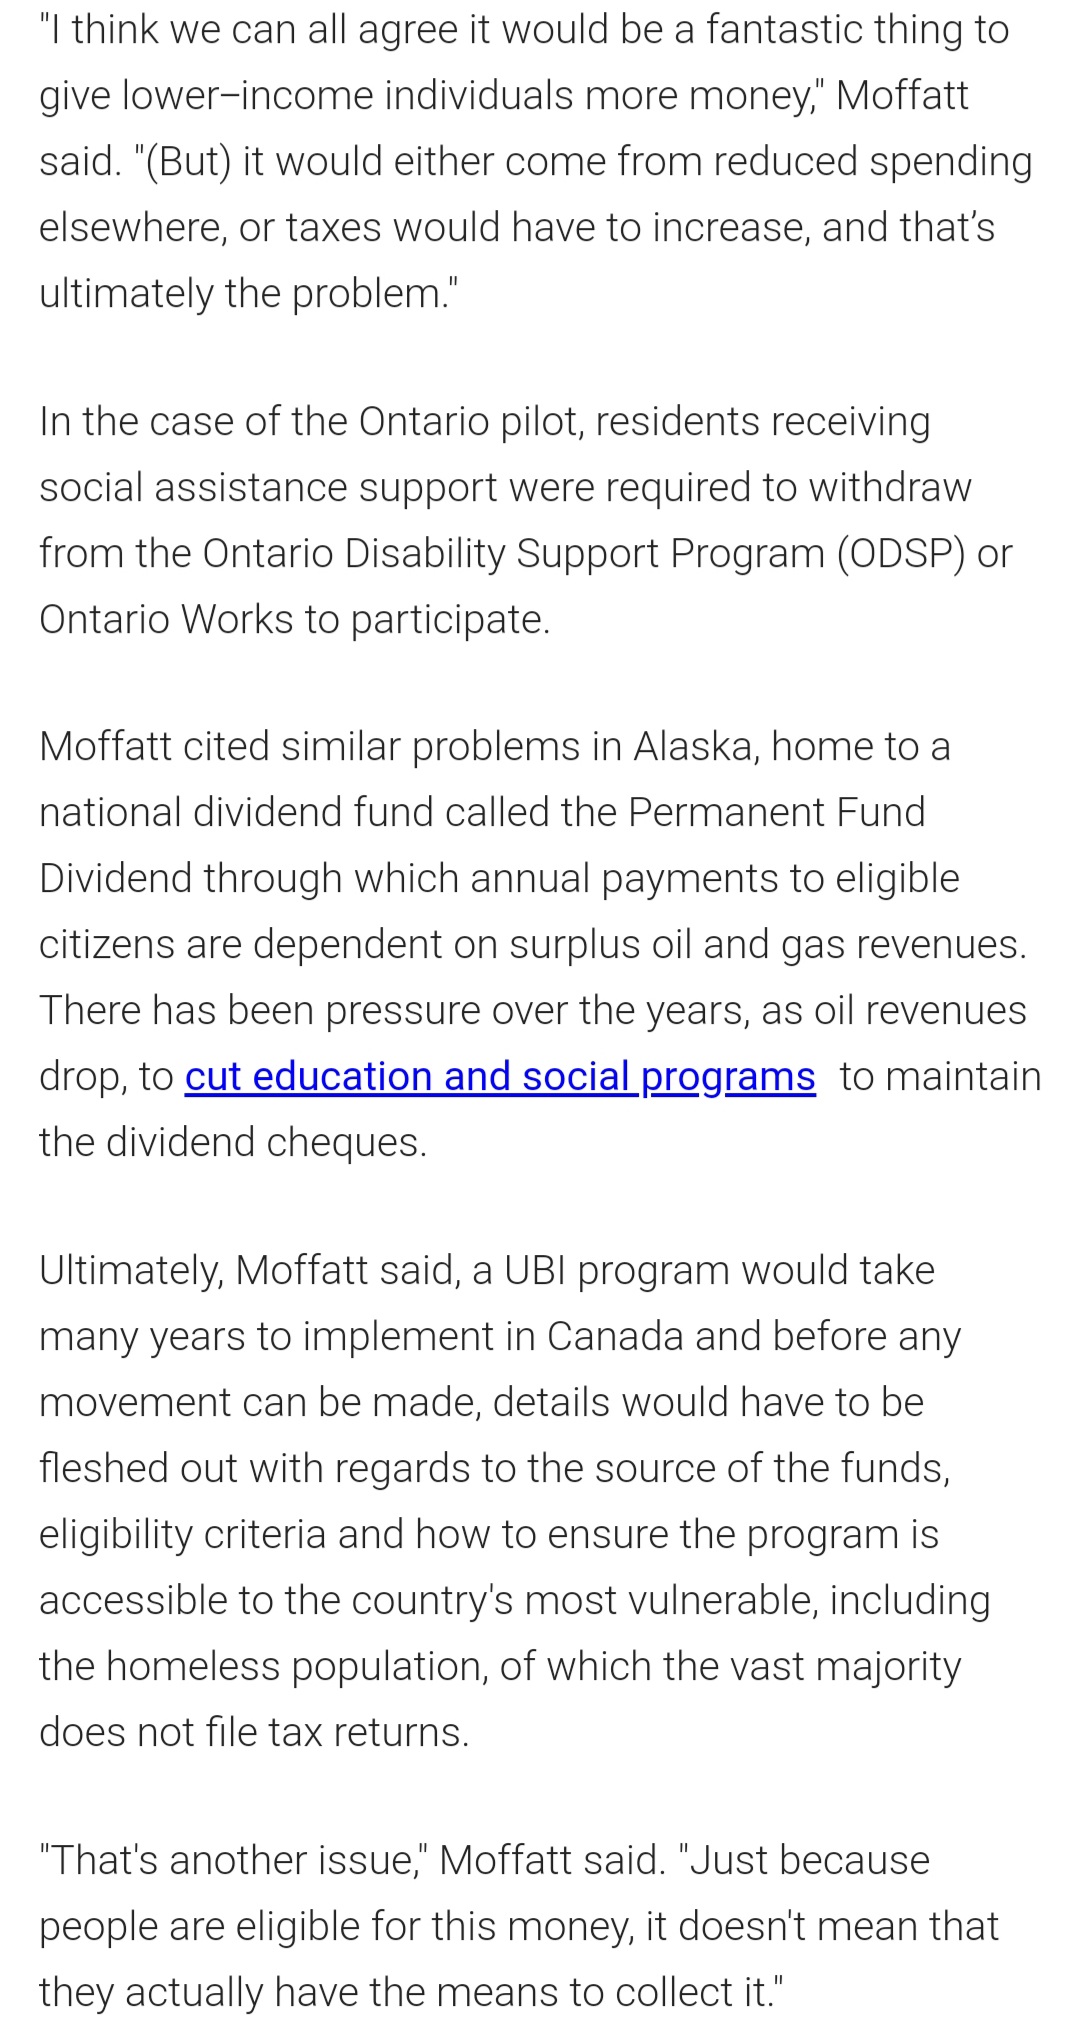 "I think we can all agree it would be a fantastic thing to
give lower-income individuals more money," Moffatt
said. "(But) it would either come from reduced spending
elsewhere, or taxes would have to increase, and that's
ultimately the problem."
In the case of the Ontario pilot, residents receiving
social assistance support were required to withdraw
from the Ontario Disability Support Program (ODSP) or
Ontario Works to participate.
Moffatt cited similar problems in Alaska, home to a
national dividend fund called the Permanent Fund
Dividend through which annual payments to eligible
citizens are dependent on surplus oil and gas revenues.
There has been pressure over the years, as oil revenues
drop, to cut education and social programs to maintain
the dividend cheques.
Ultimately, Moffatt said, a UBI program would take
many years to implement in Canada and before any
movement can be made, details would have to be
fleshed out with regards to the source of the funds,
eligibility criteria and how to ensure the program is
accessible to the country's most vulnerable, including
the homeless population, of which the vast majority
does not file tax returns.
"That's another issue," Moffatt said. "Just because
people are eligible for this money, it doesn't mean that
they actually have the means to collect it."
